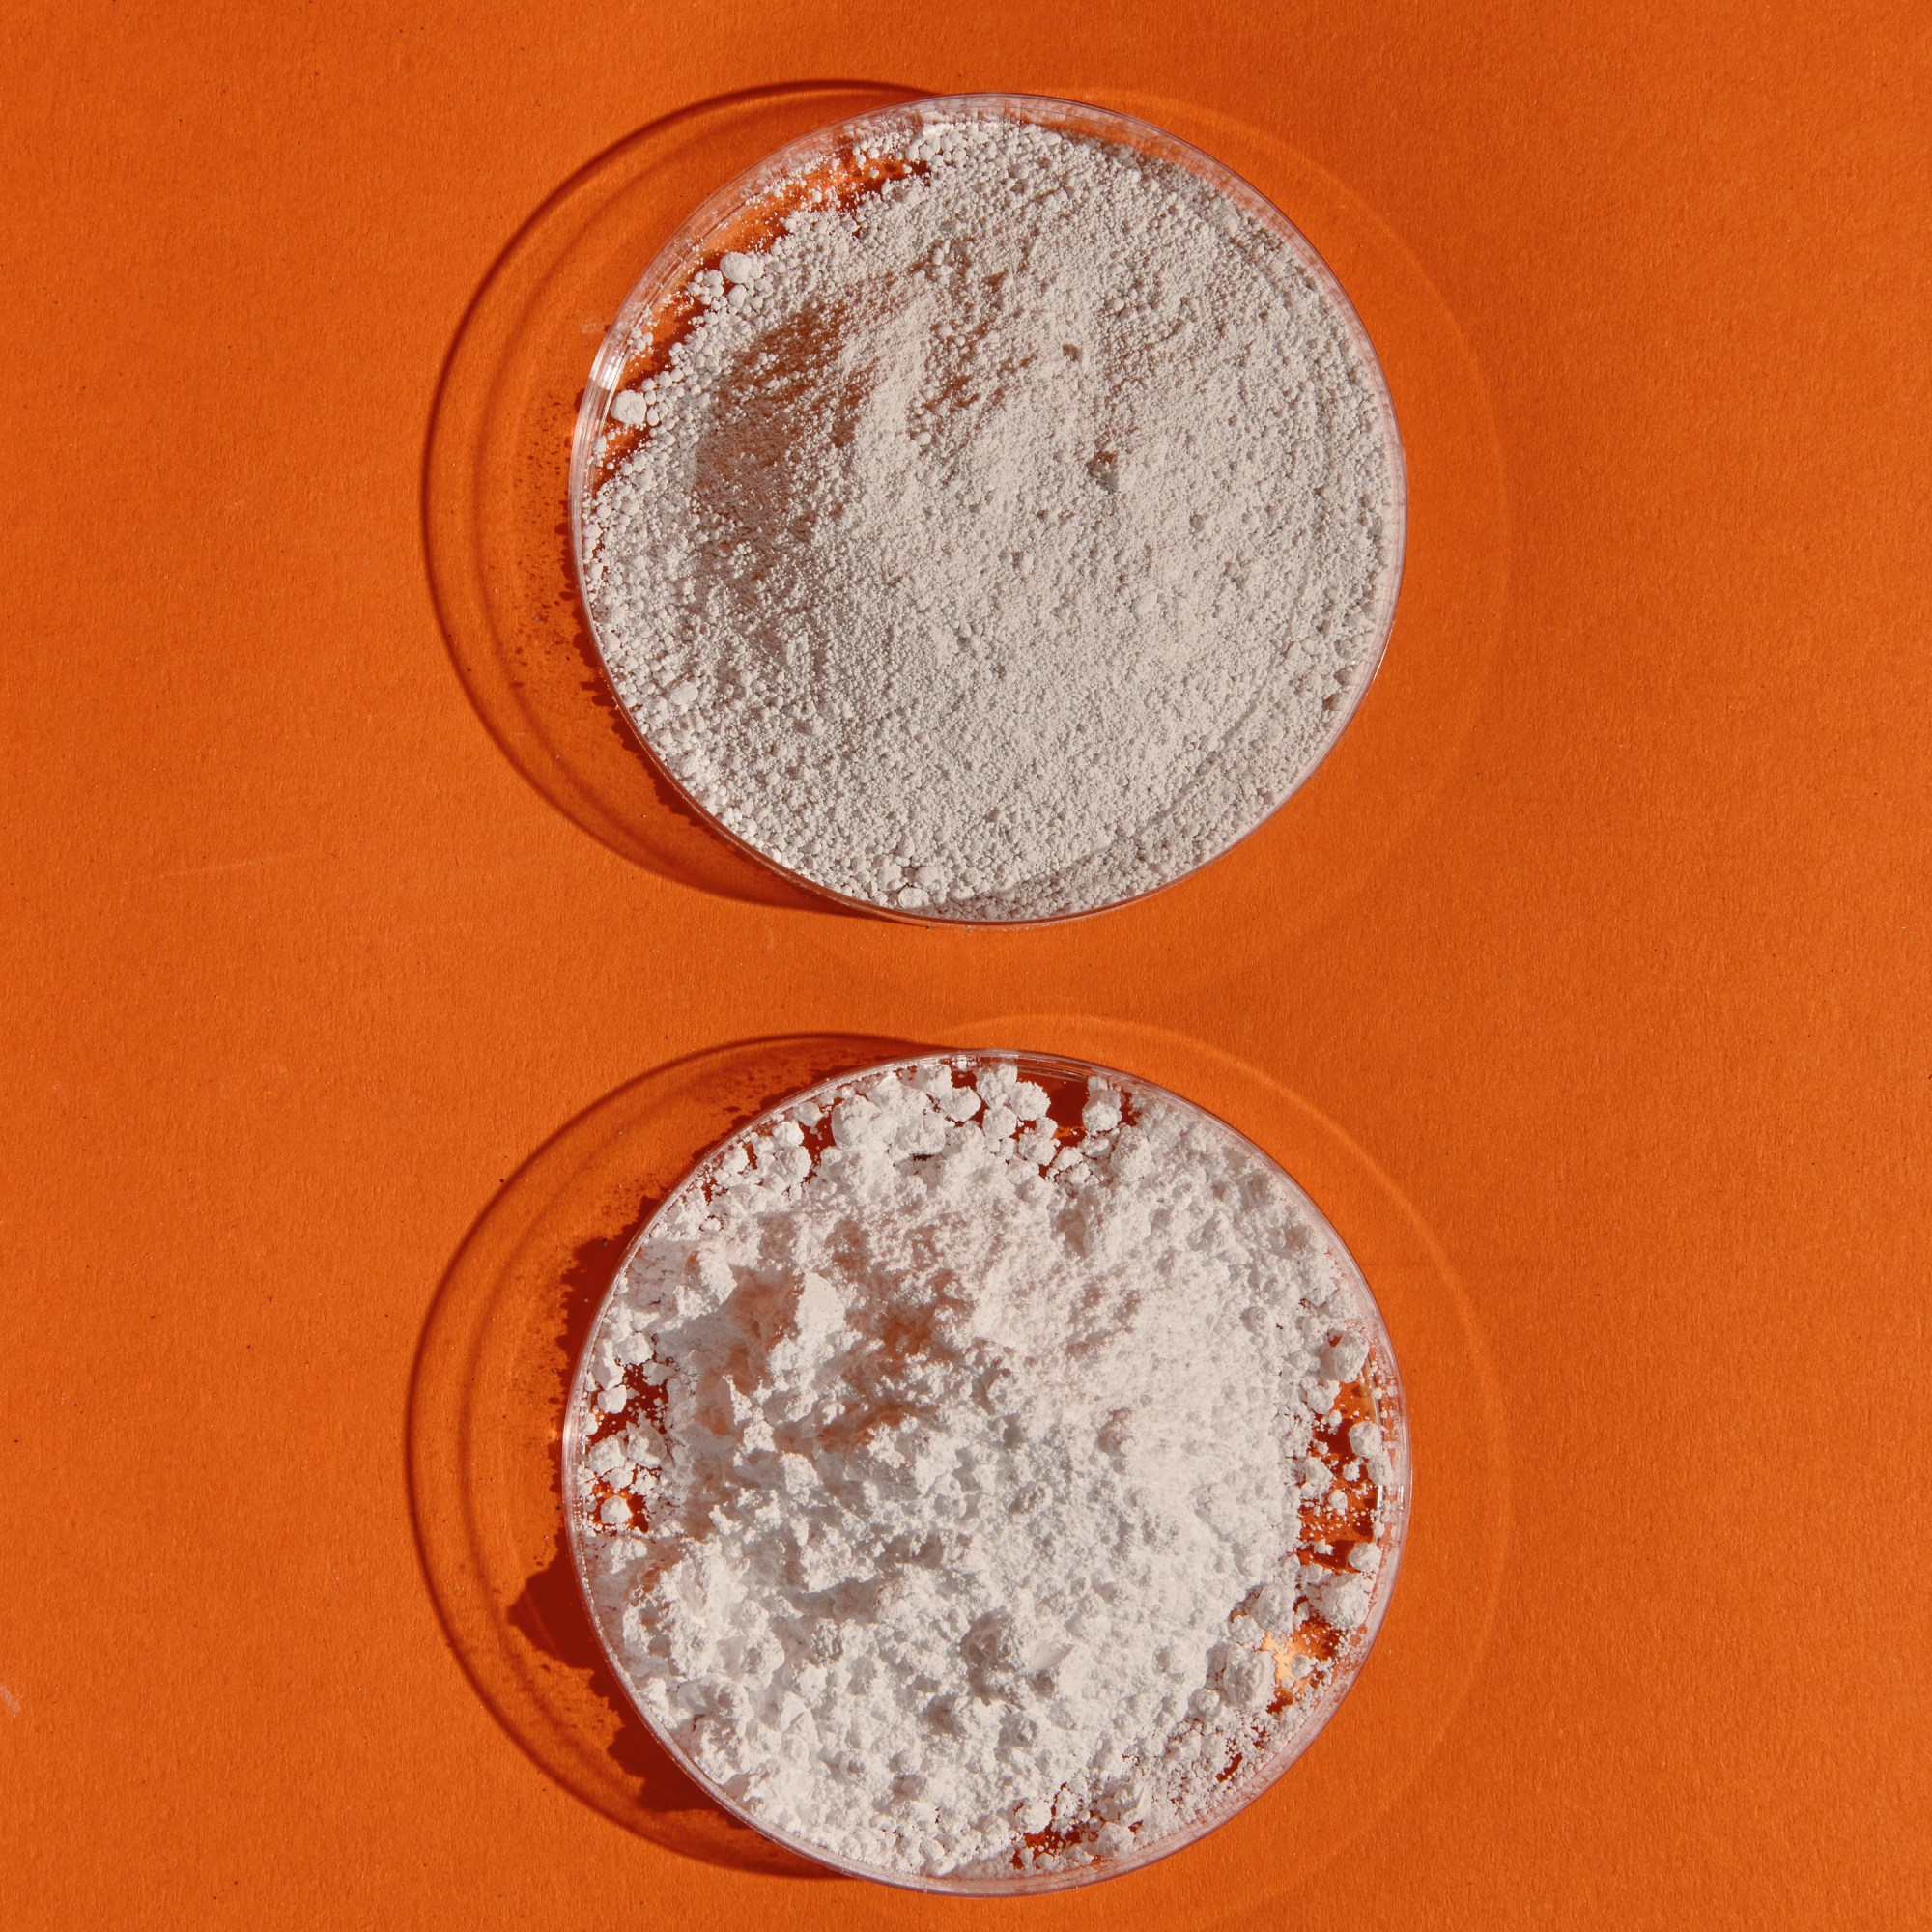 two petri dishes with powdered material